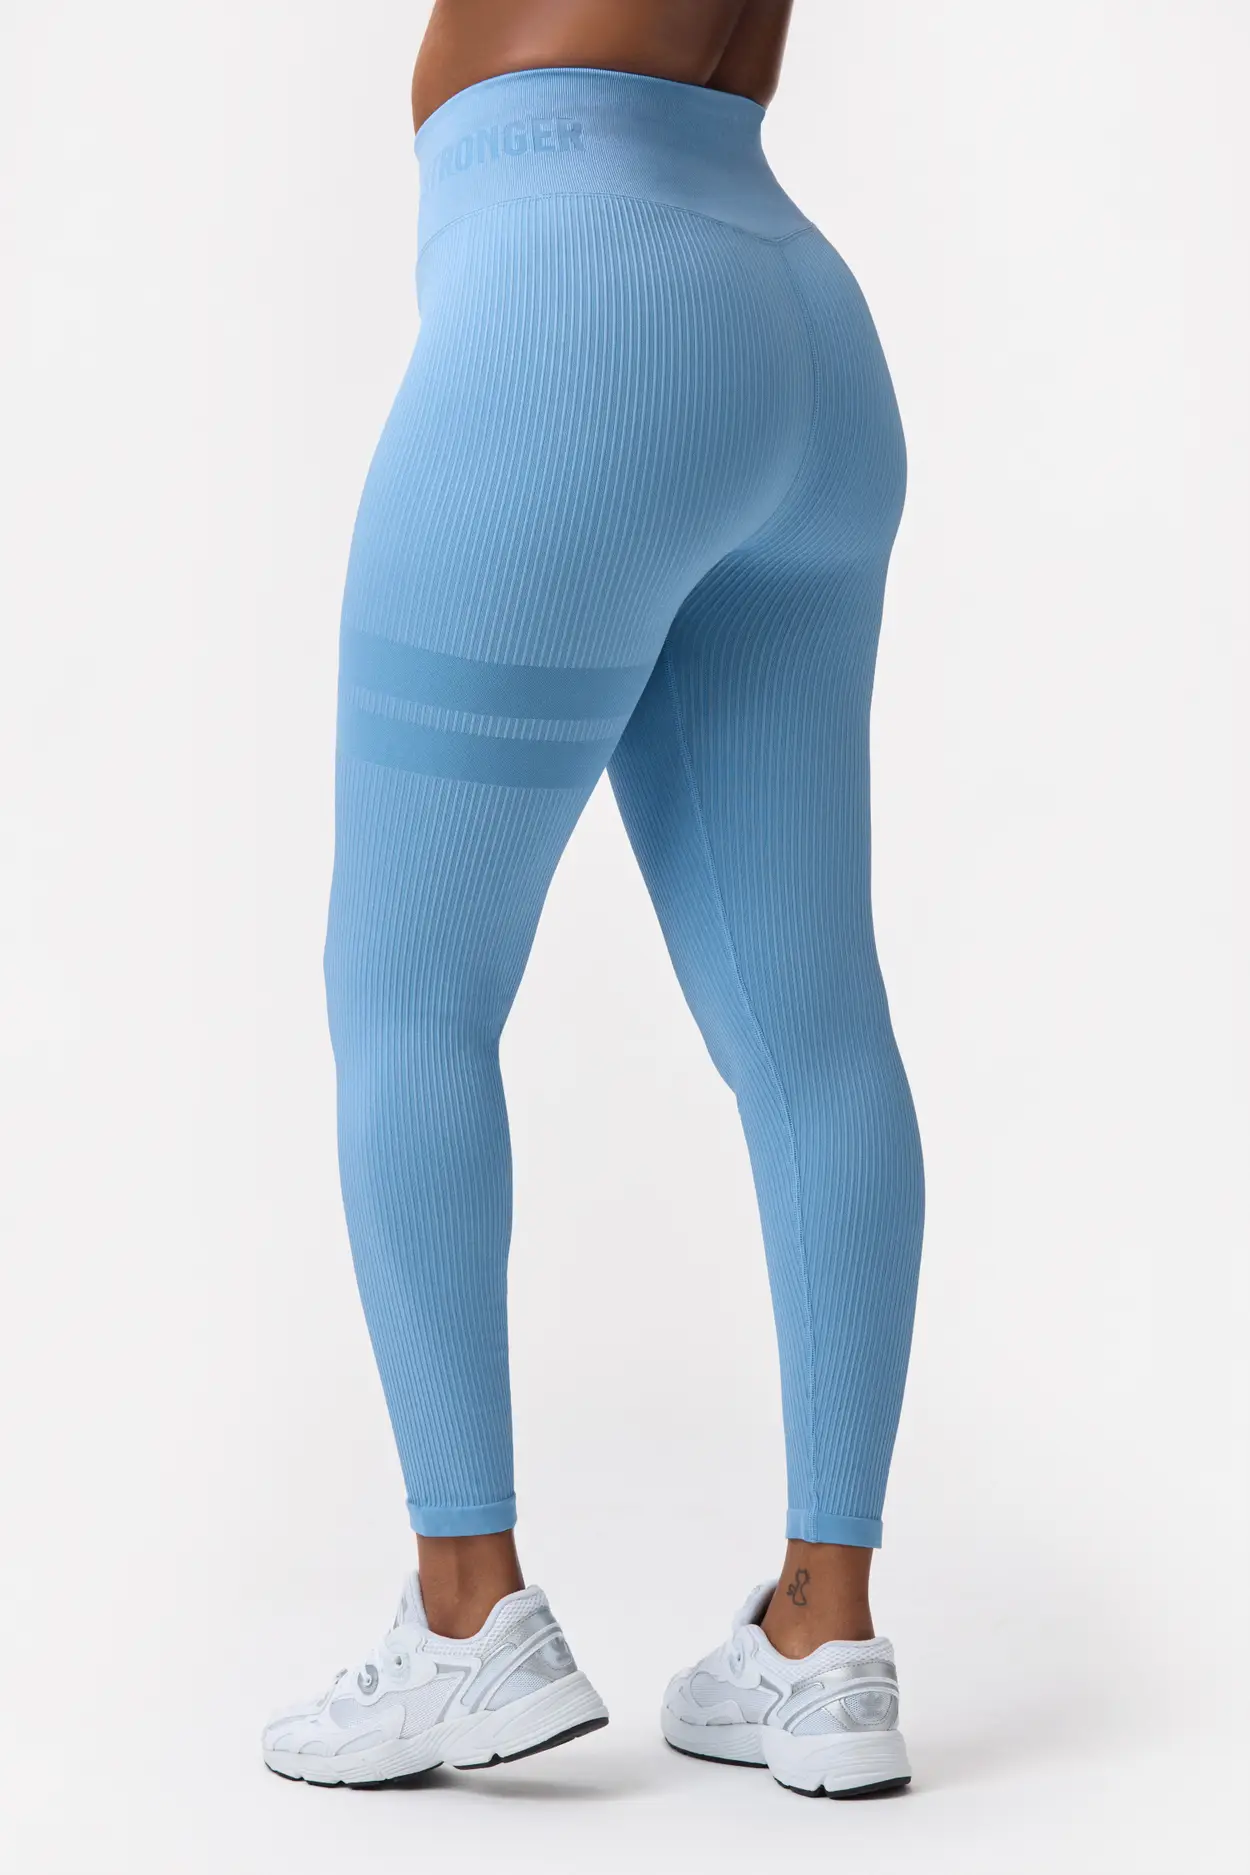 How to Choose Between Leggings and Shorts – Bombshell Sportswear